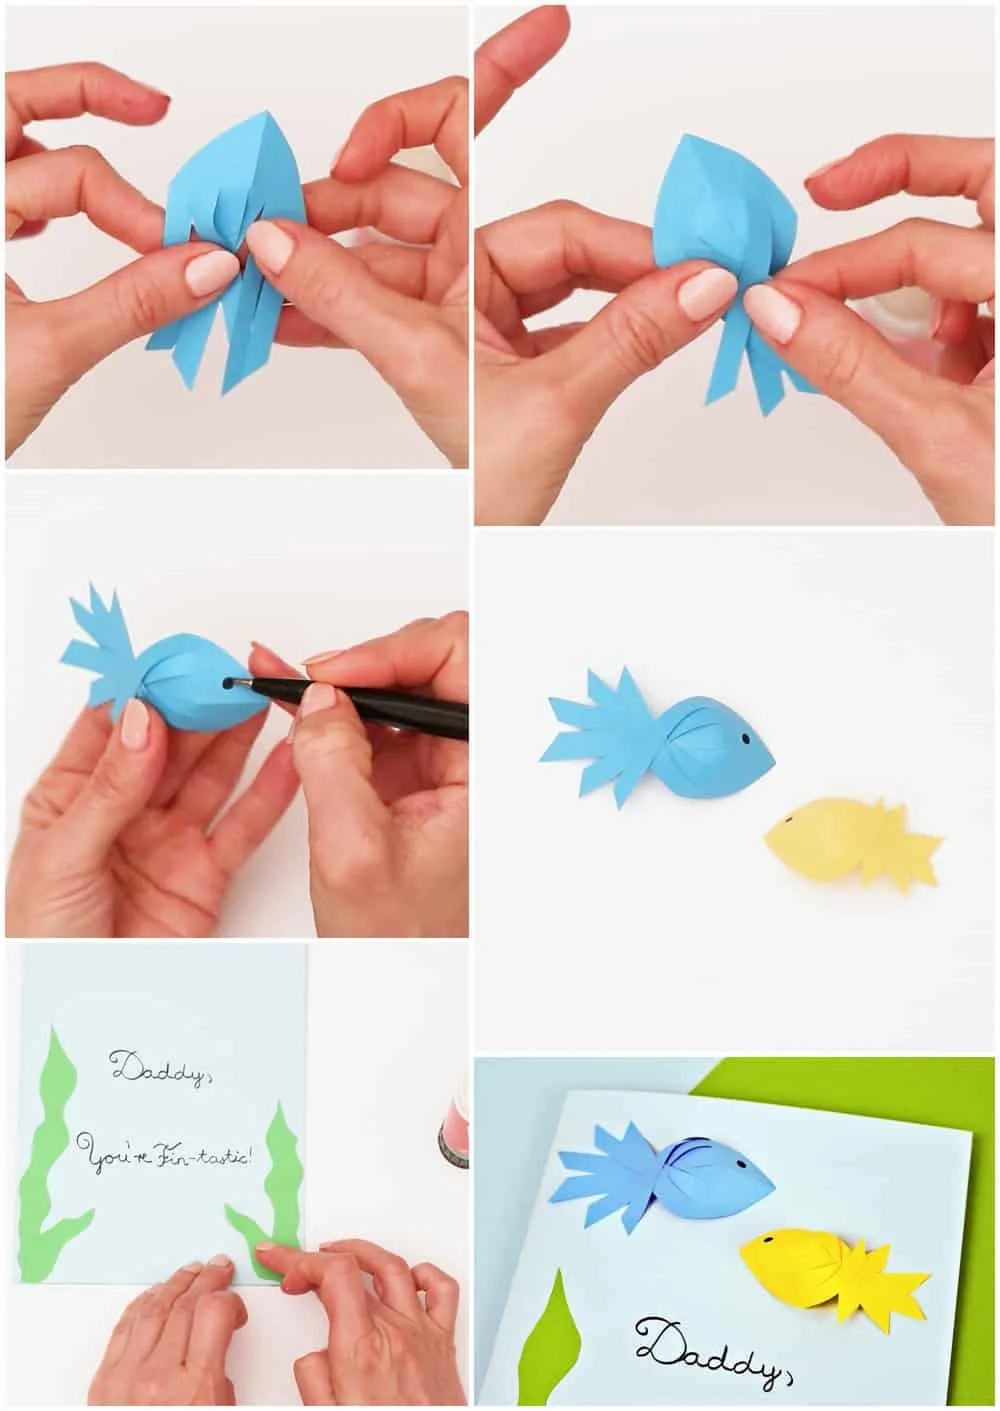 Process photos of how to make 3D paper fish for a father's day card